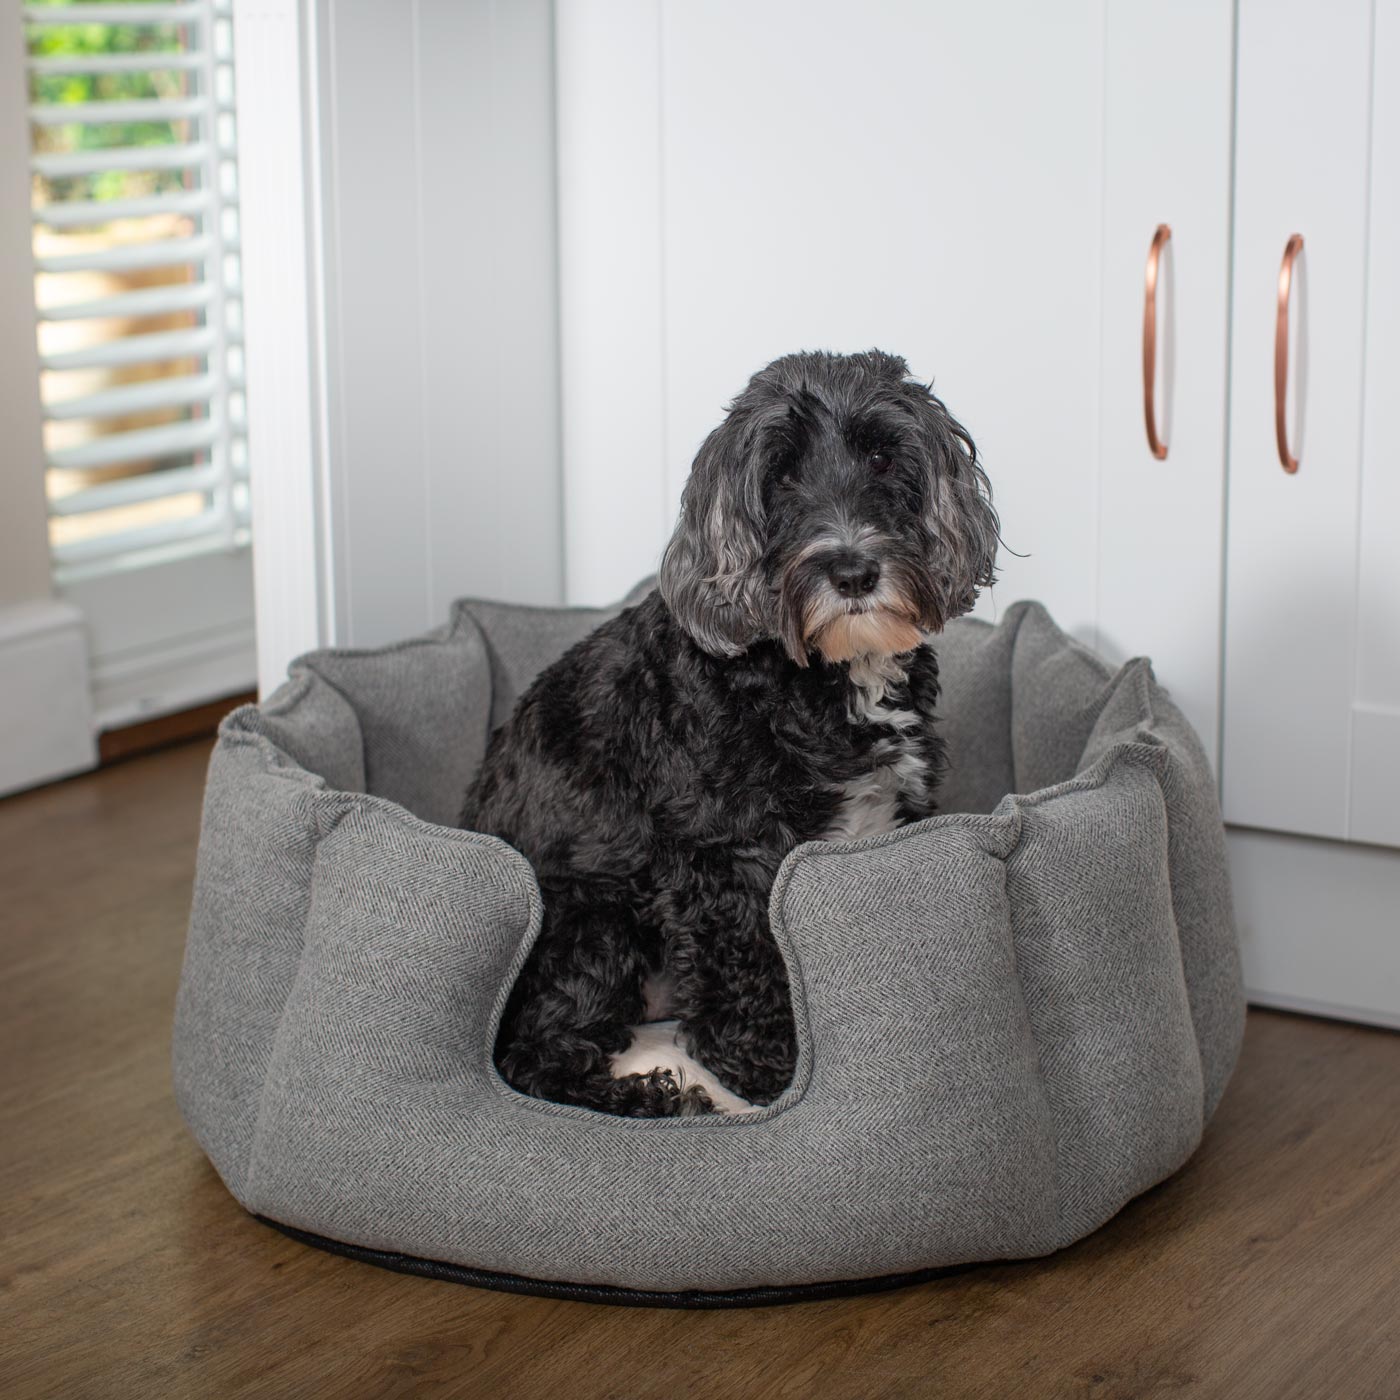 Discover Our Luxurious High Wall Bed For Dogs, Featuring inner pillow with plush teddy fleece on one side To Craft The Perfect Dogs Bed In Stunning Pewter Herringbone Tweed! Available To Personalize Now at Lords & Labradors US